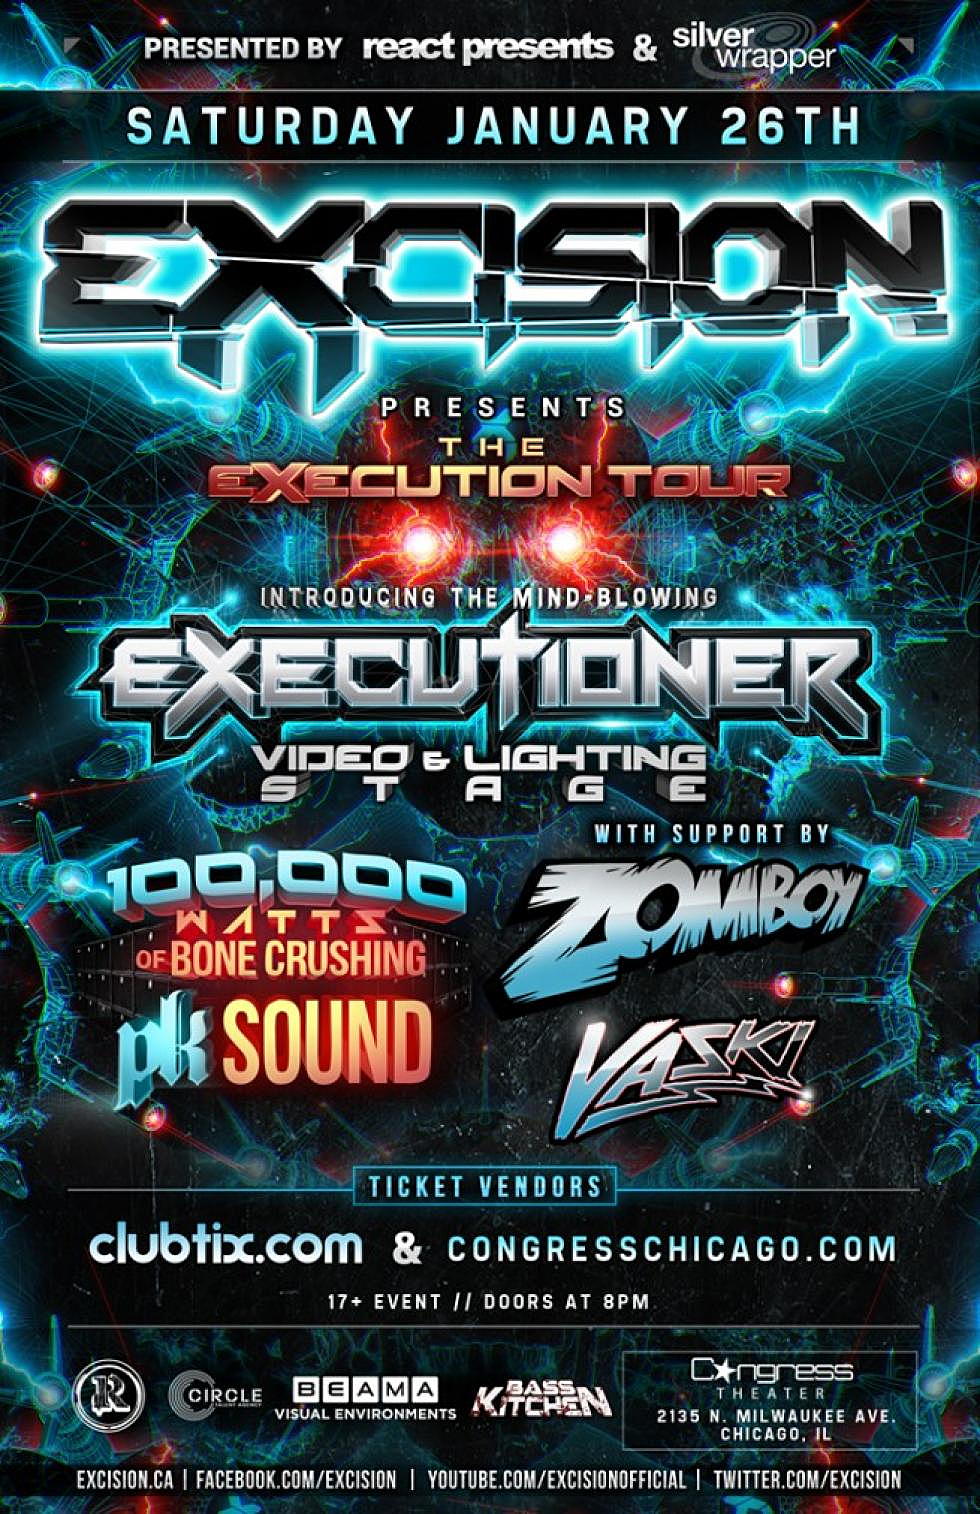 Excision Jan 26th at Congress Theater